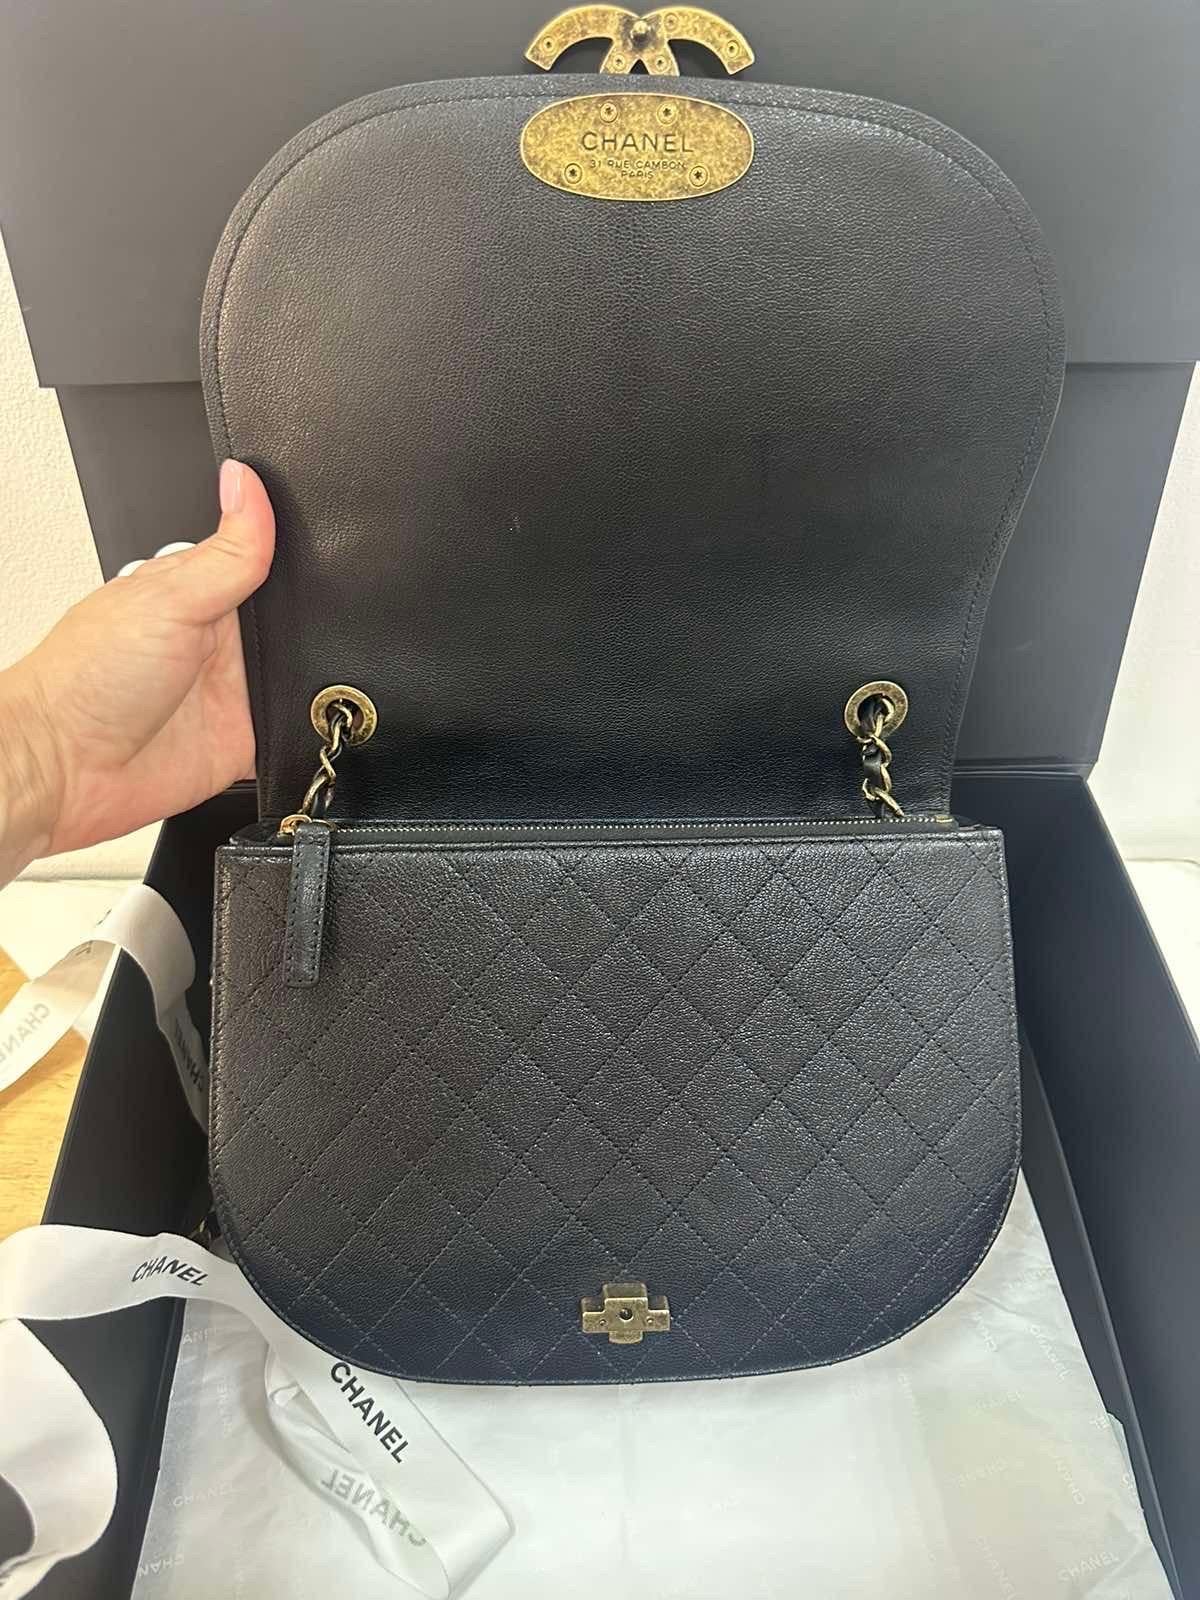  This Chanel Coco Curve has 1 top handle and 1 shoulder strap. 
 It has a flap closure with a CC pin-press fasten and 1 back exterior zipped pocket. 
 Inside it has 1 flat section at the back, 1 zipped flat section at the front, and a central